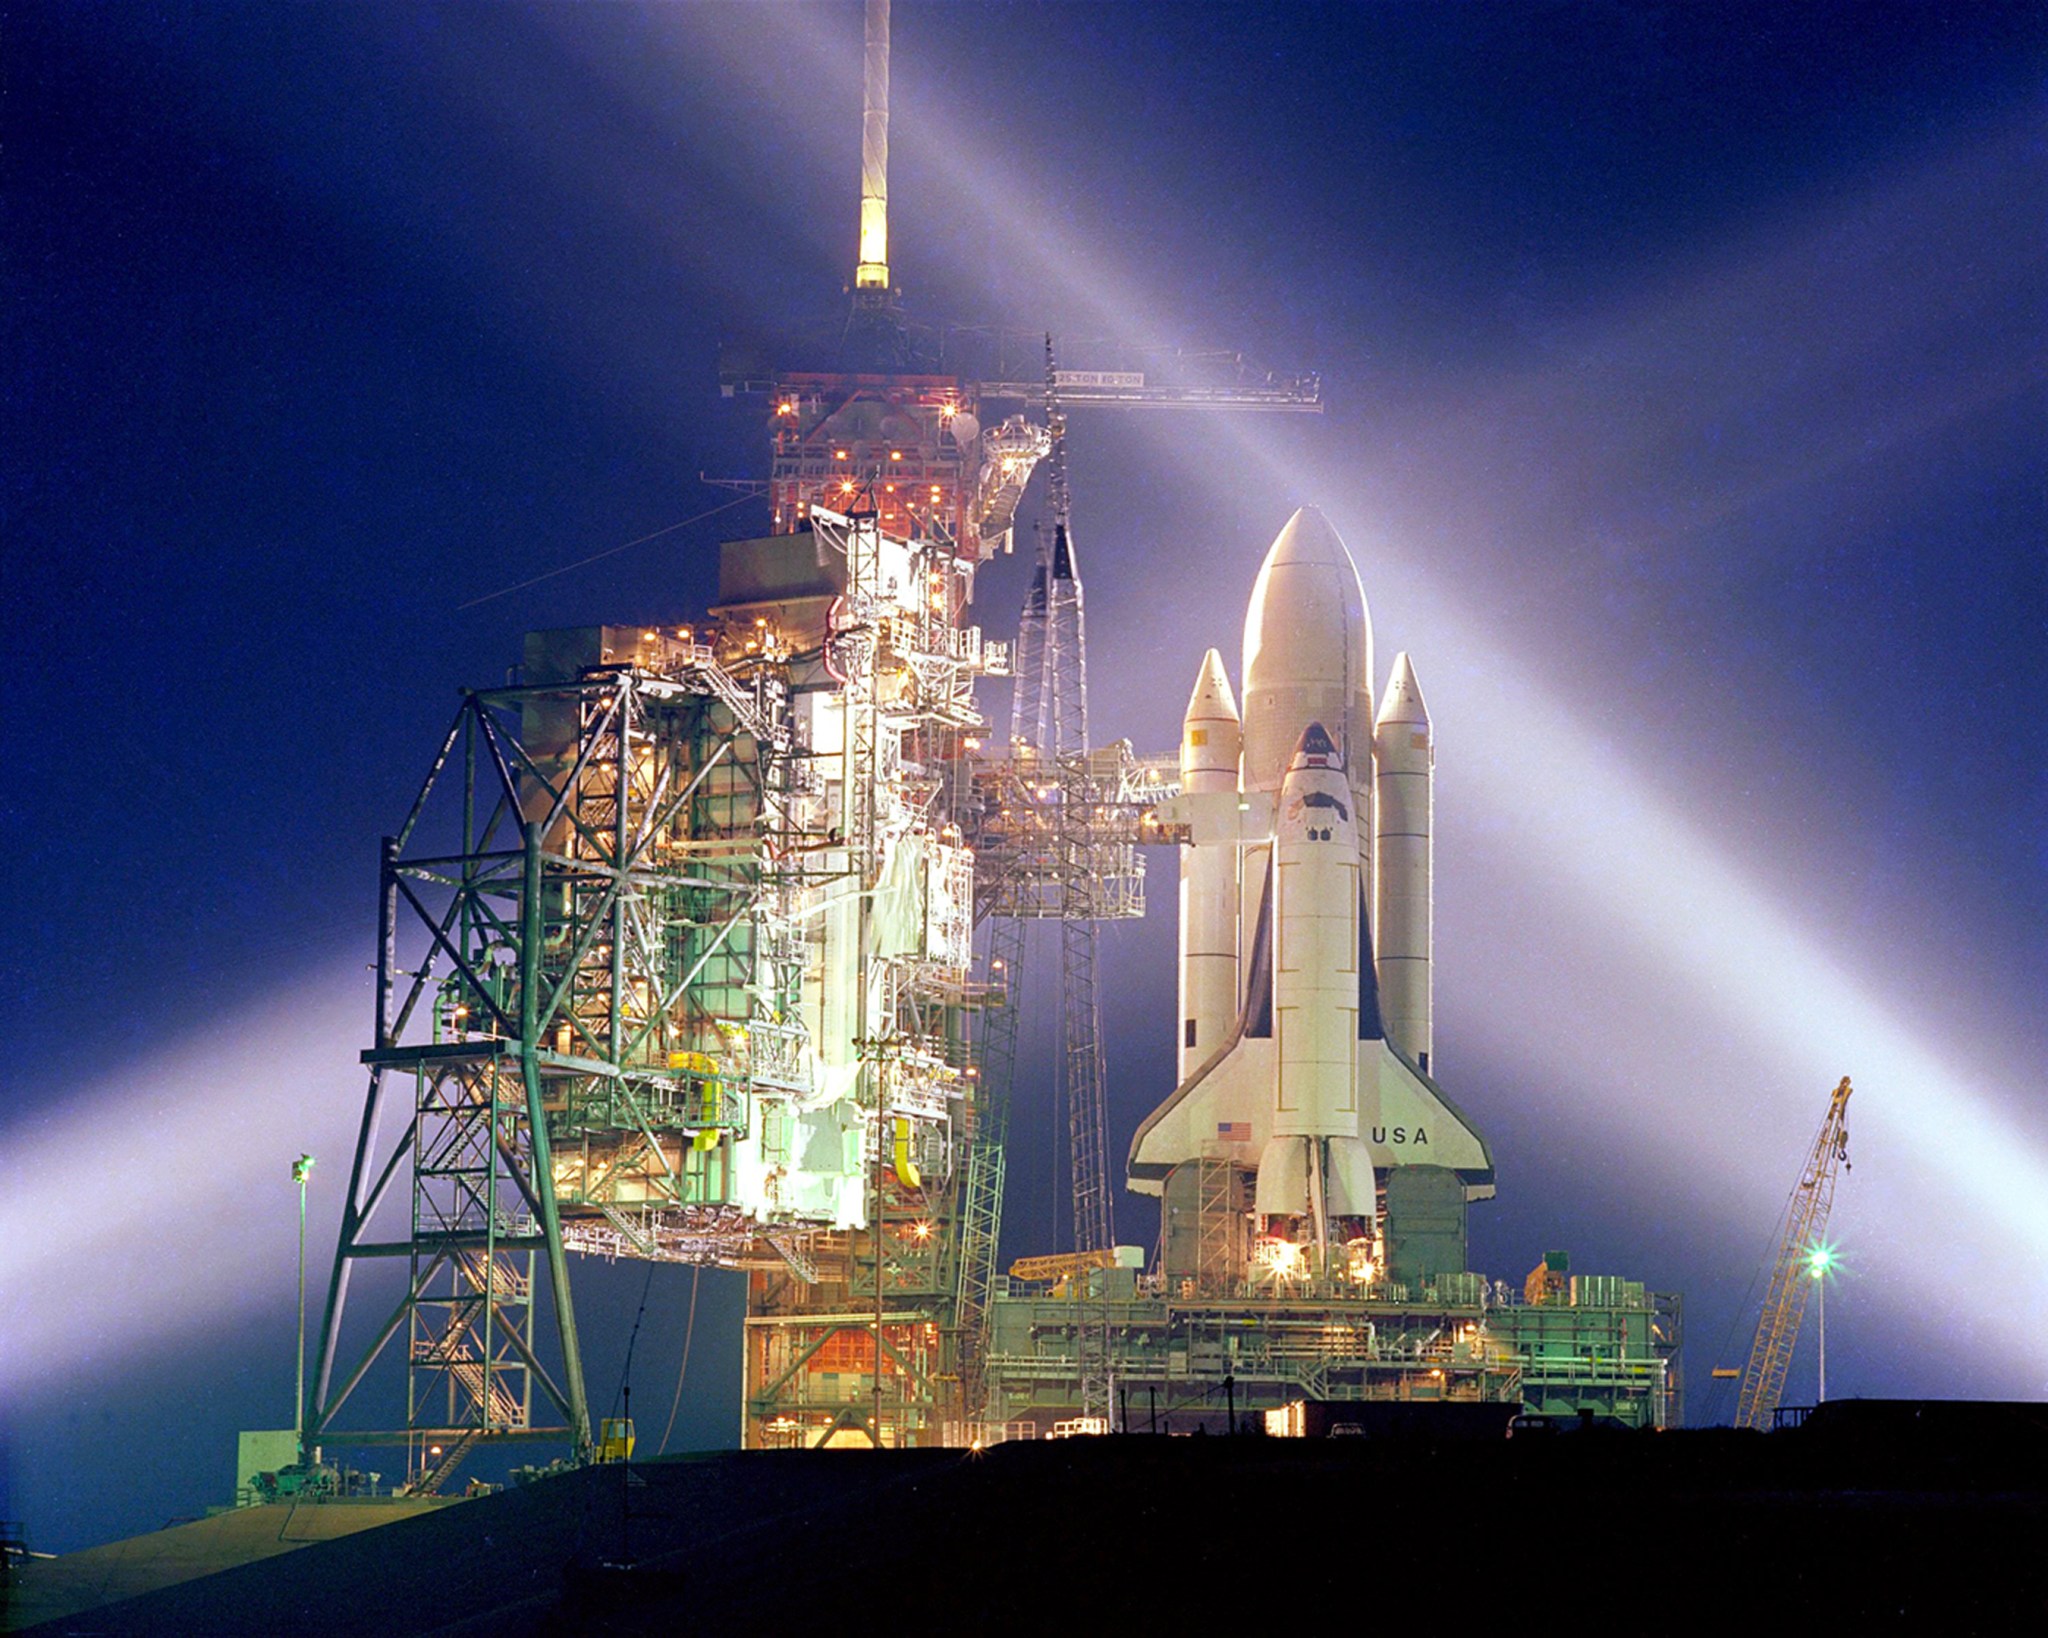 Spotlights shine on Space Shuttle Columbia as it sits on the launch pad prior to its first flight.